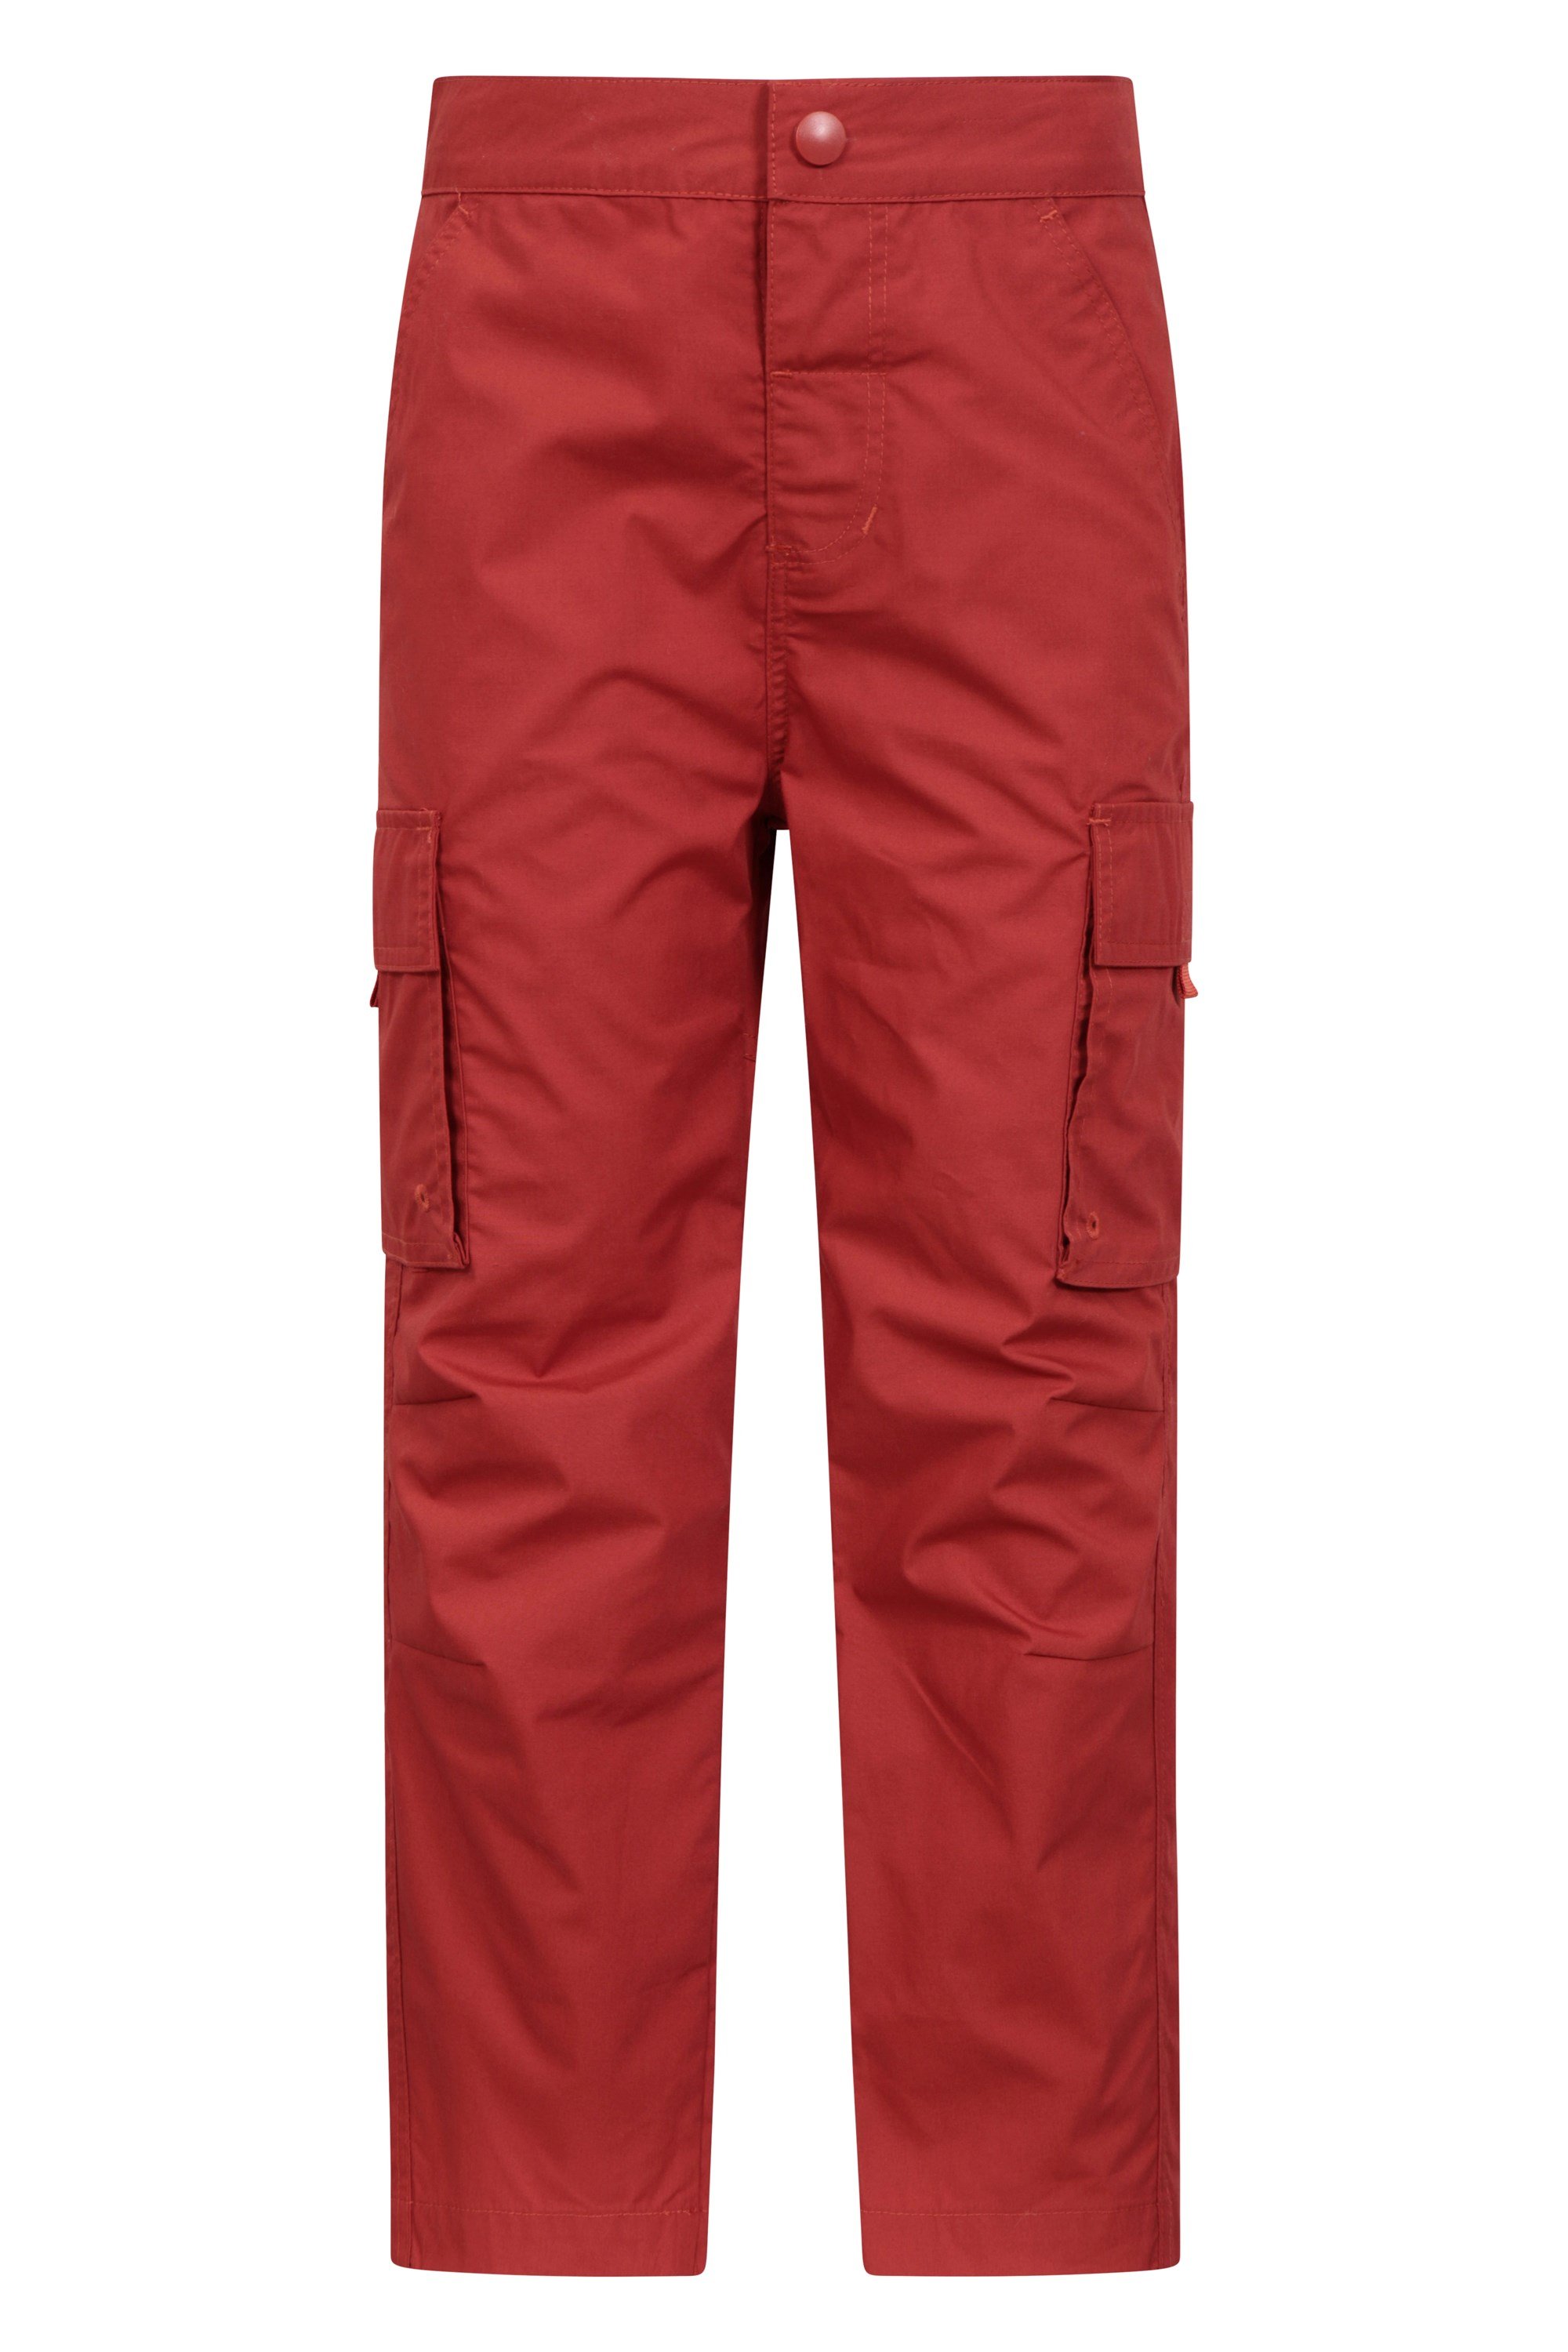 Active Kids Trousers - Red